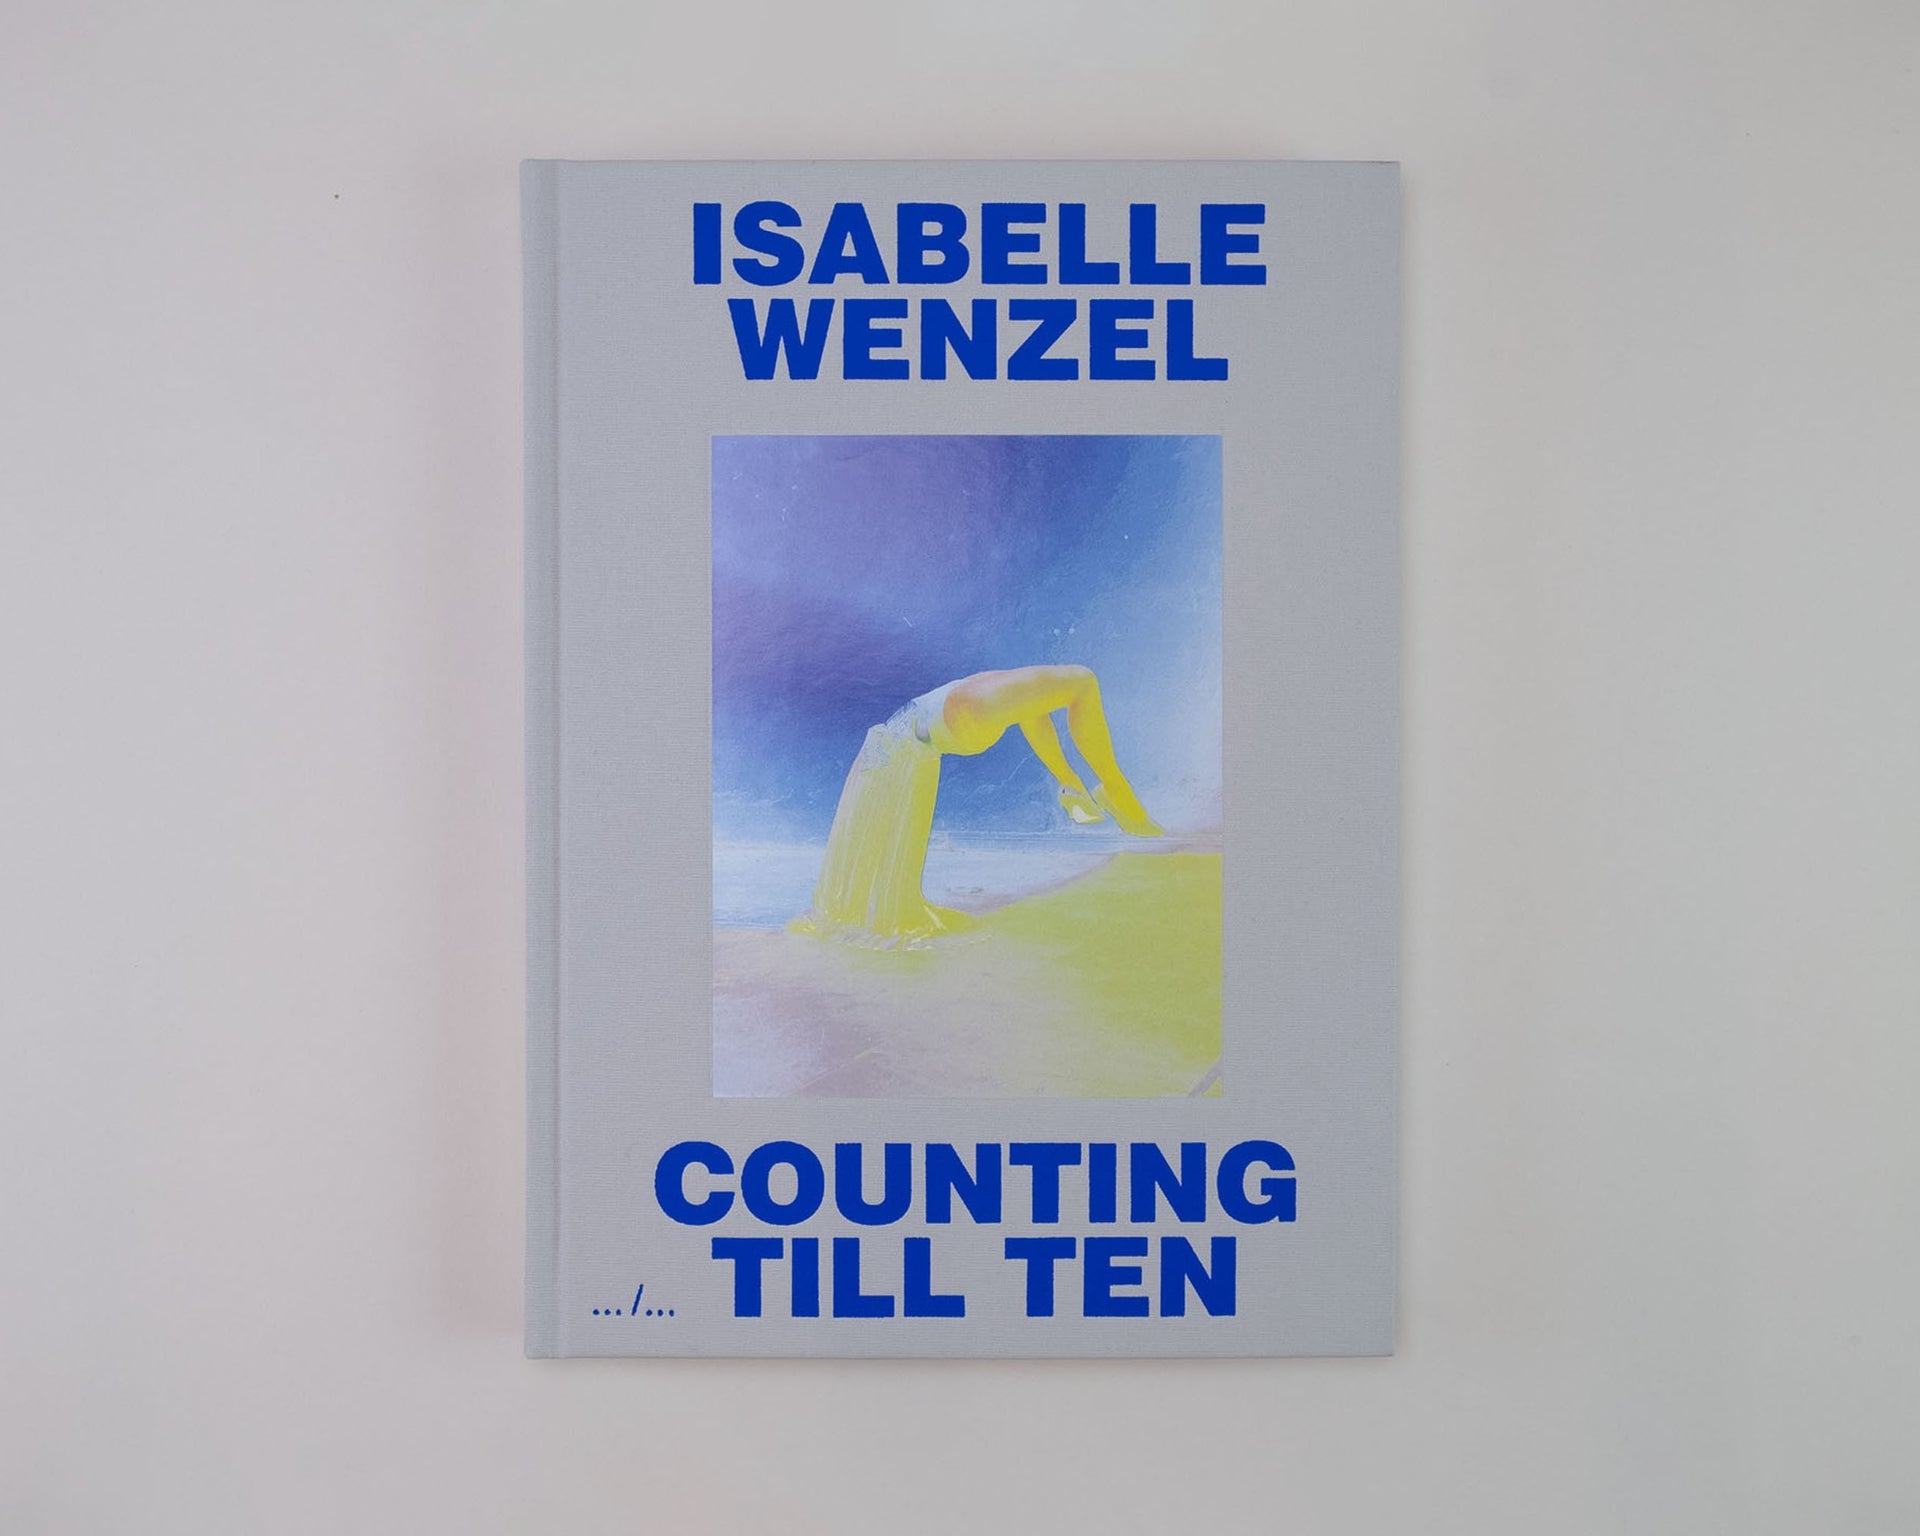 Isabella Wenzel - Counting till ten